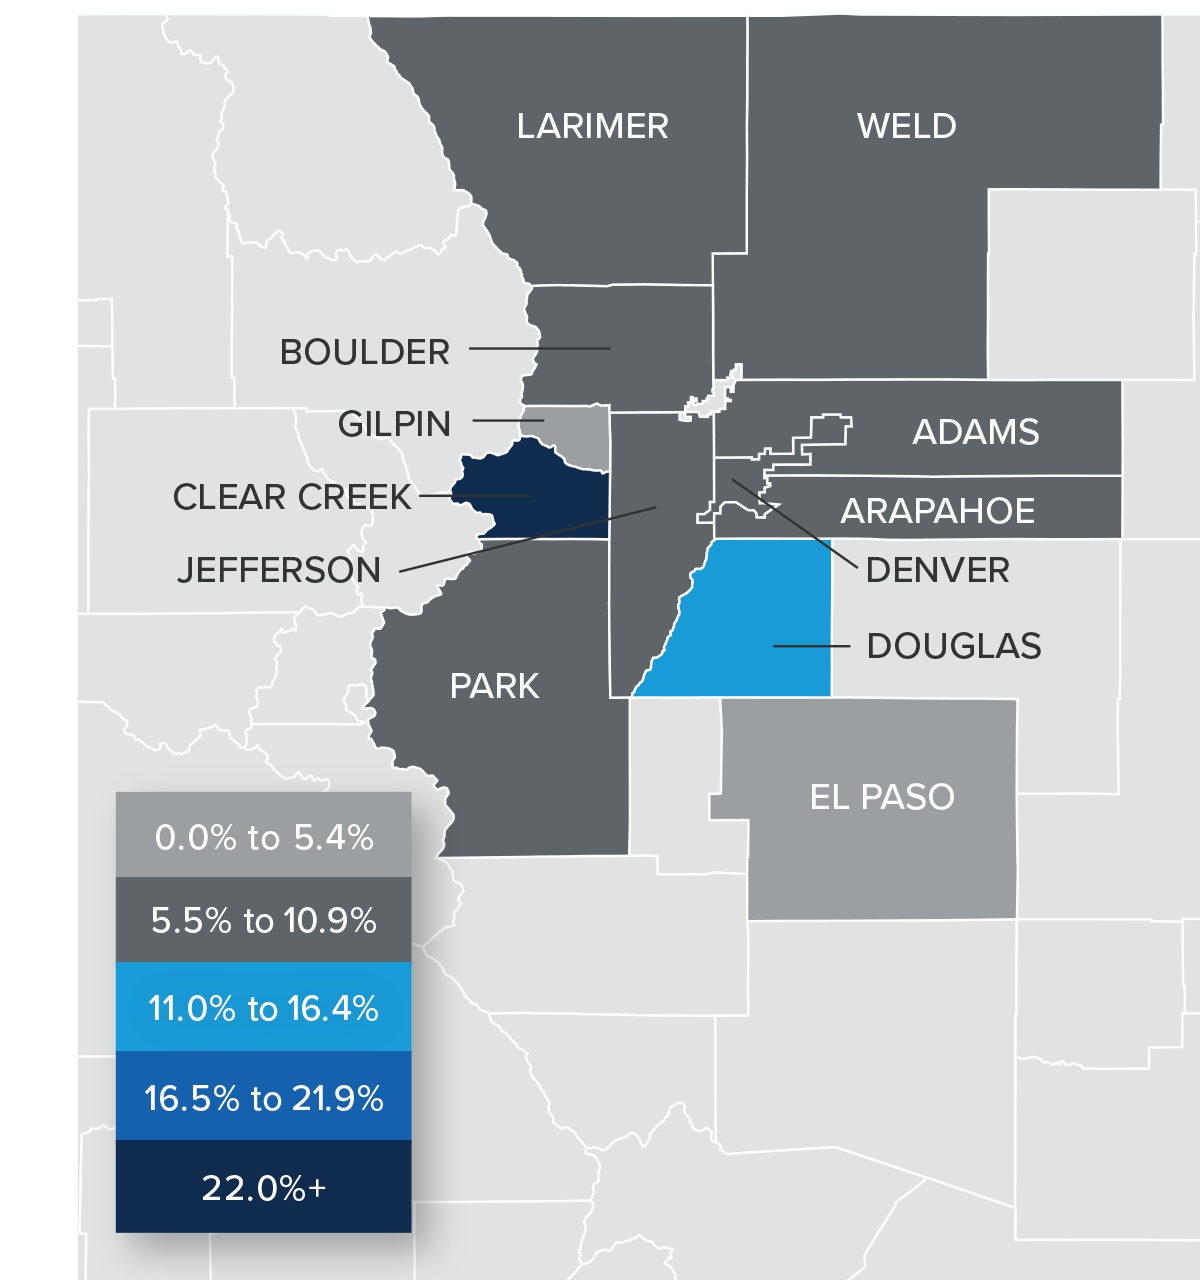 A map showing the real estate home prices percentage changes for various counties in Colorado. Different colors correspond to different tiers of percentage change. El Paso and Gilpin County have a percentage change in the 0% to 5.4% range. Larimer, Weld, Boulder, Adams, Arapahoe, Jefferson, Denver, and Park are all in the 5.5% to 10.9% change range, Douglas is in the 11% to 16.4% range, and Clear Creek is in the 22%+ range.